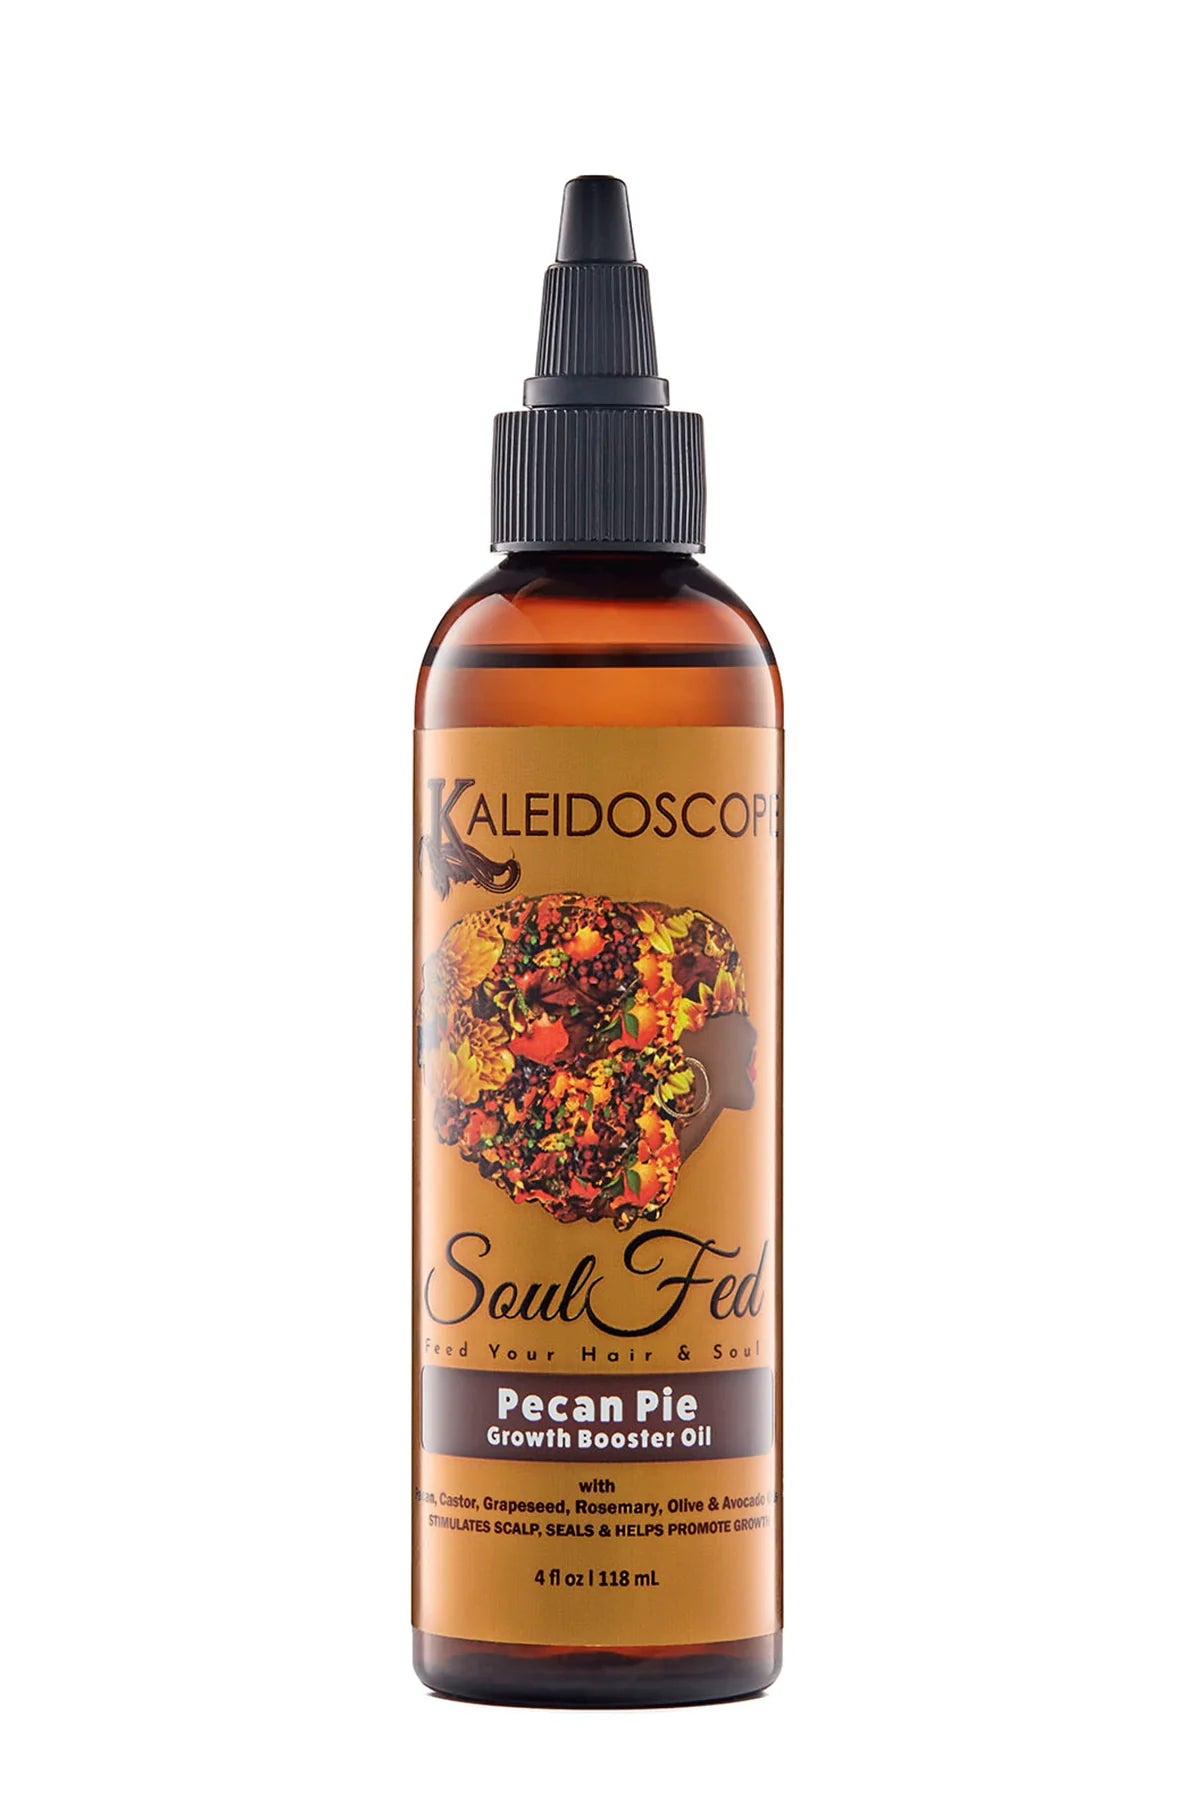 Kaleidoscope® SoulFed Pecan Pie Growth Booster